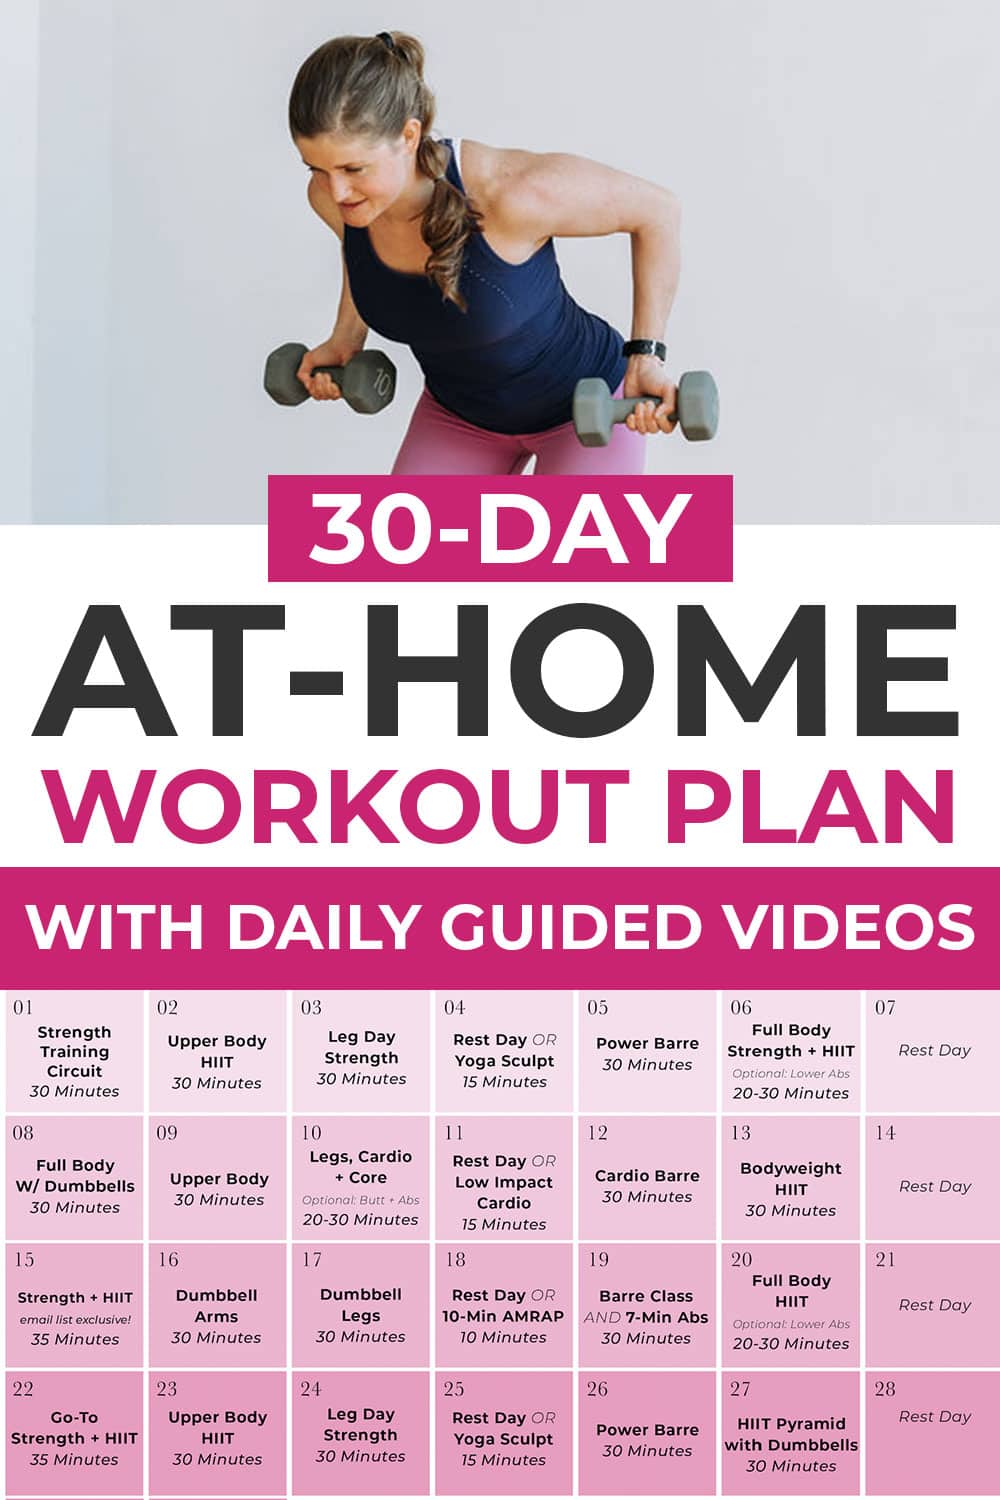 Home Workout Plan For Women - Nourish, Move, Love